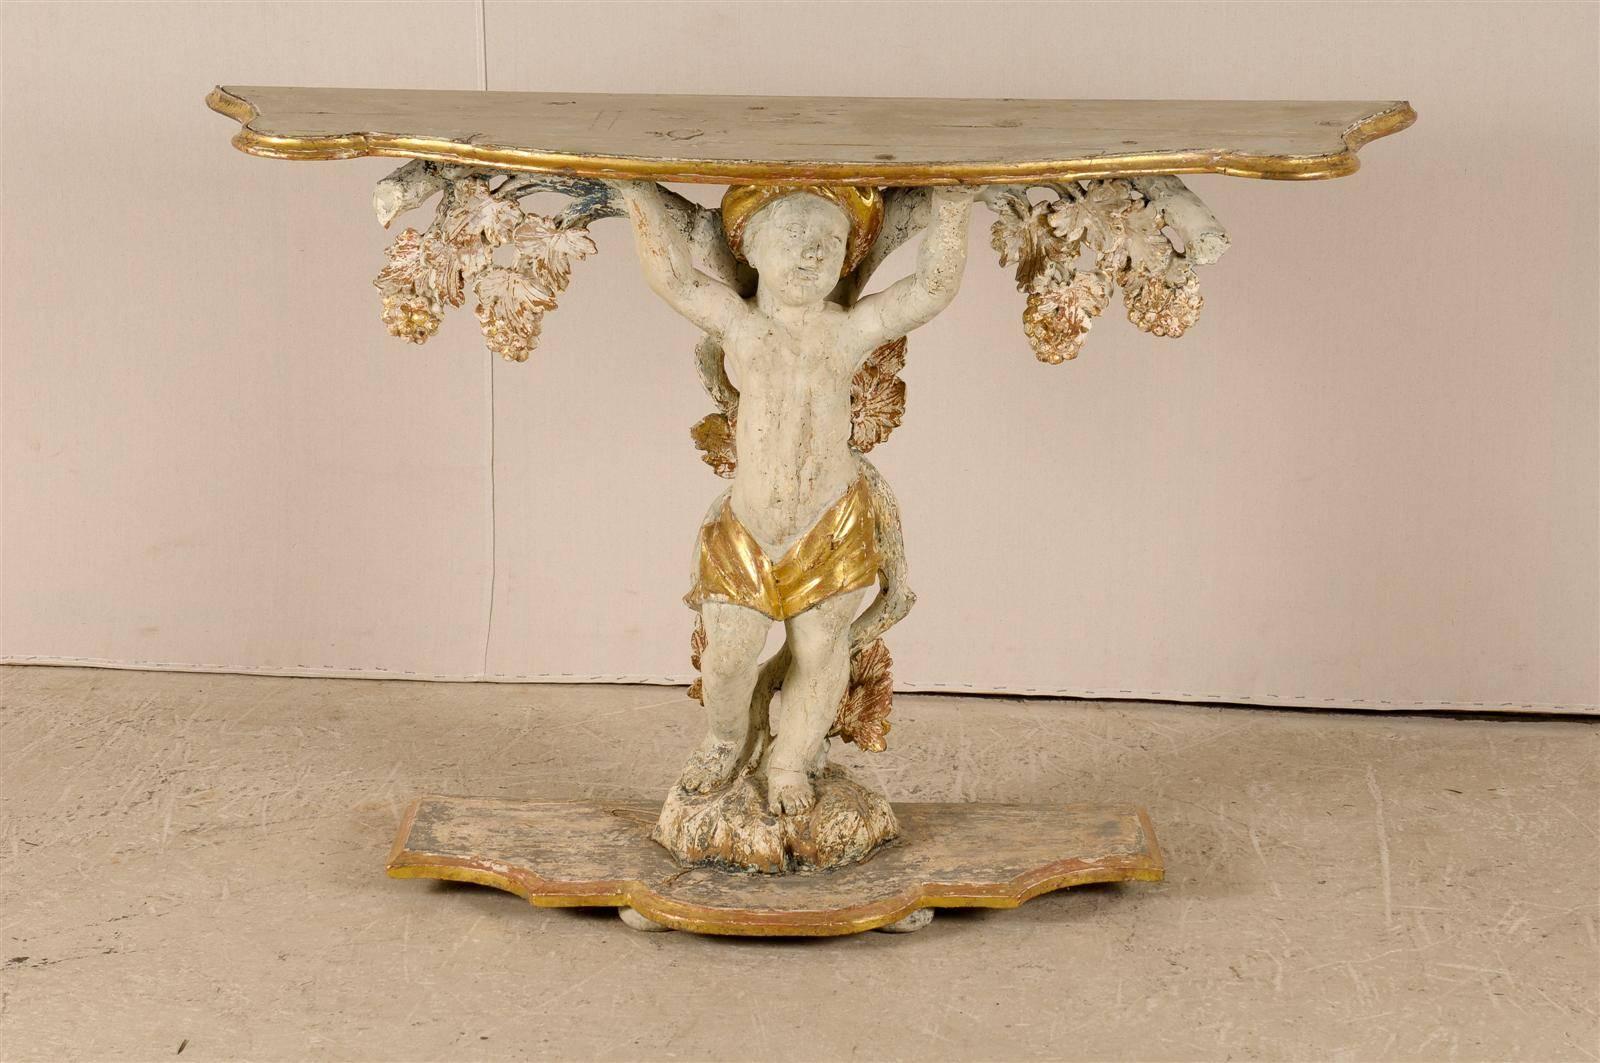 An exquisite early 18th century Italian console table. This Italian console table features a painted and gilded wooden top supported by the carving of a putto. His loincloth and turban are gilded. He is backed by a grapevine carving. This piece